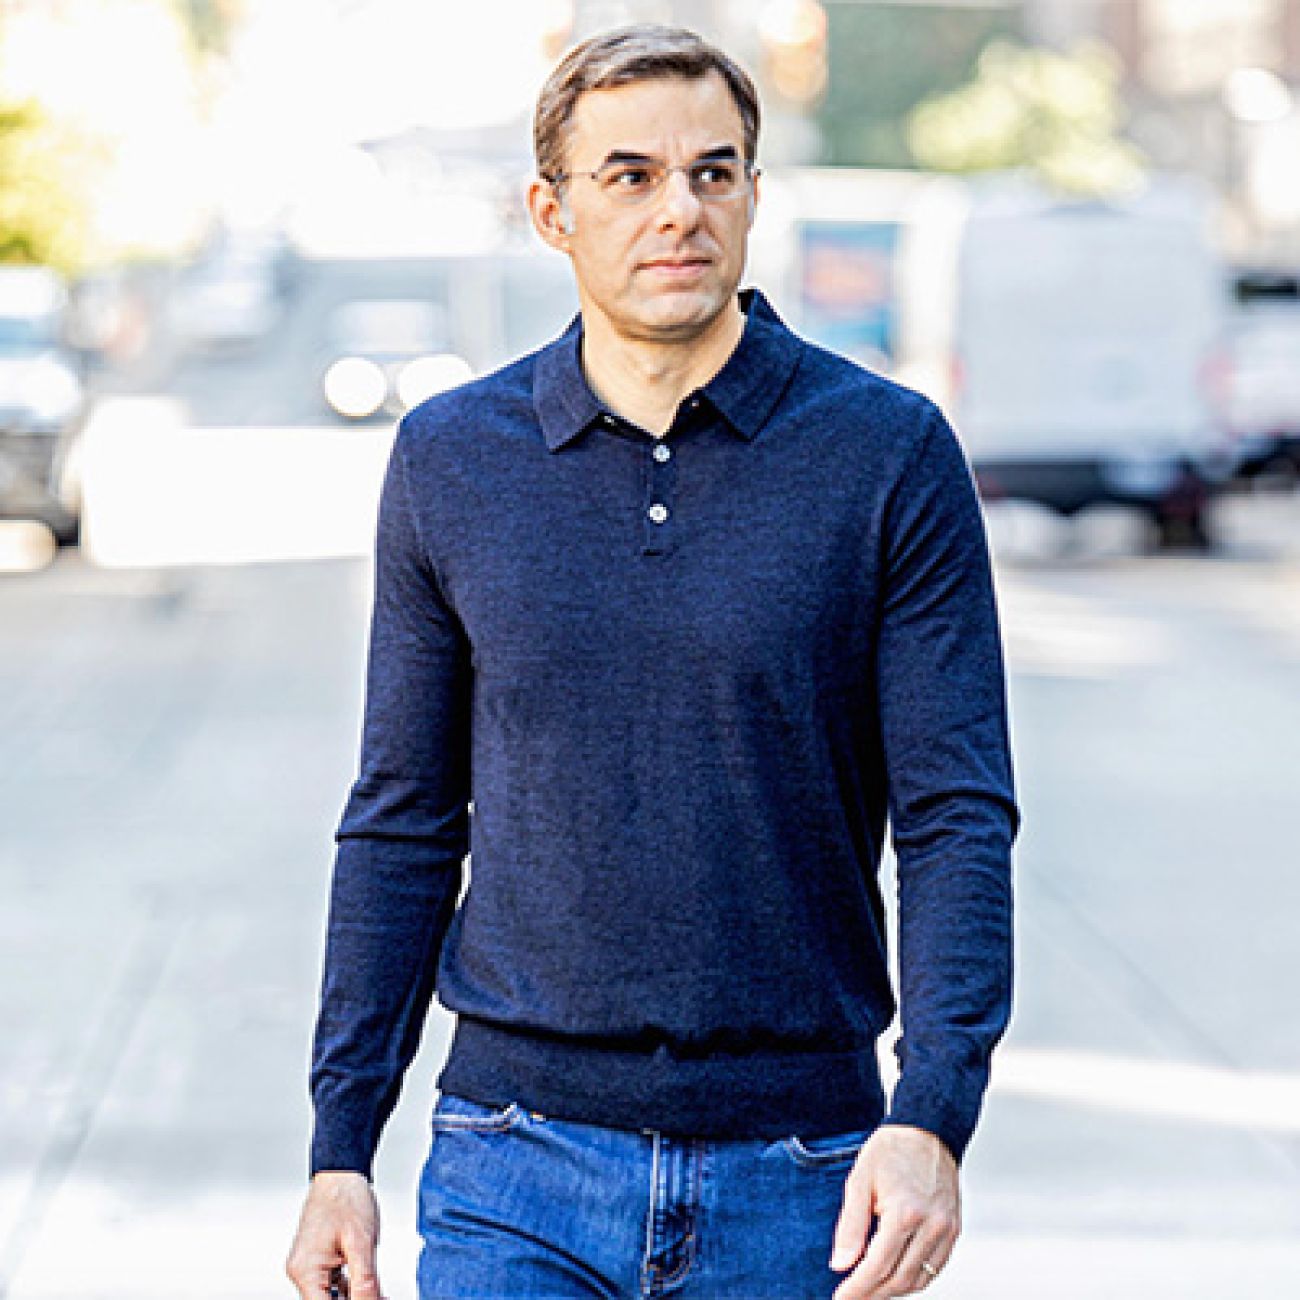 Former U.S. Rep. Justin Amash wearing a blue sweater